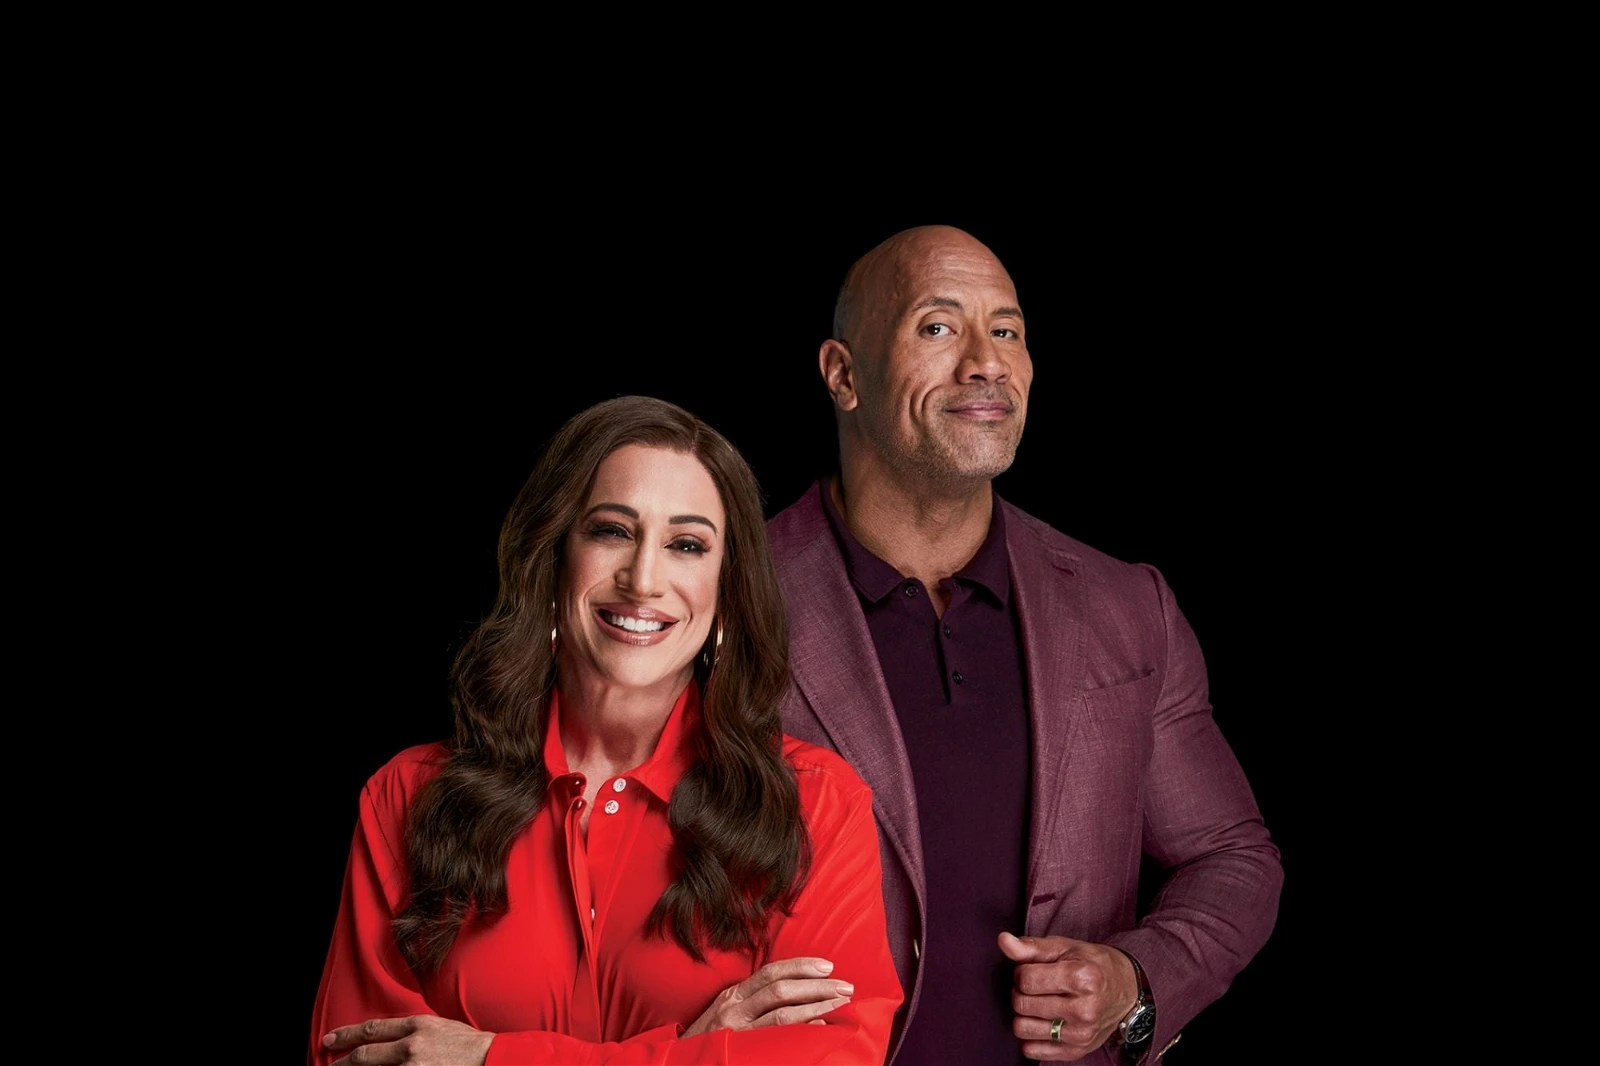 Is Dany Garcia Related To Dwayne "The Rock" Johnson? Relationship And Family Details